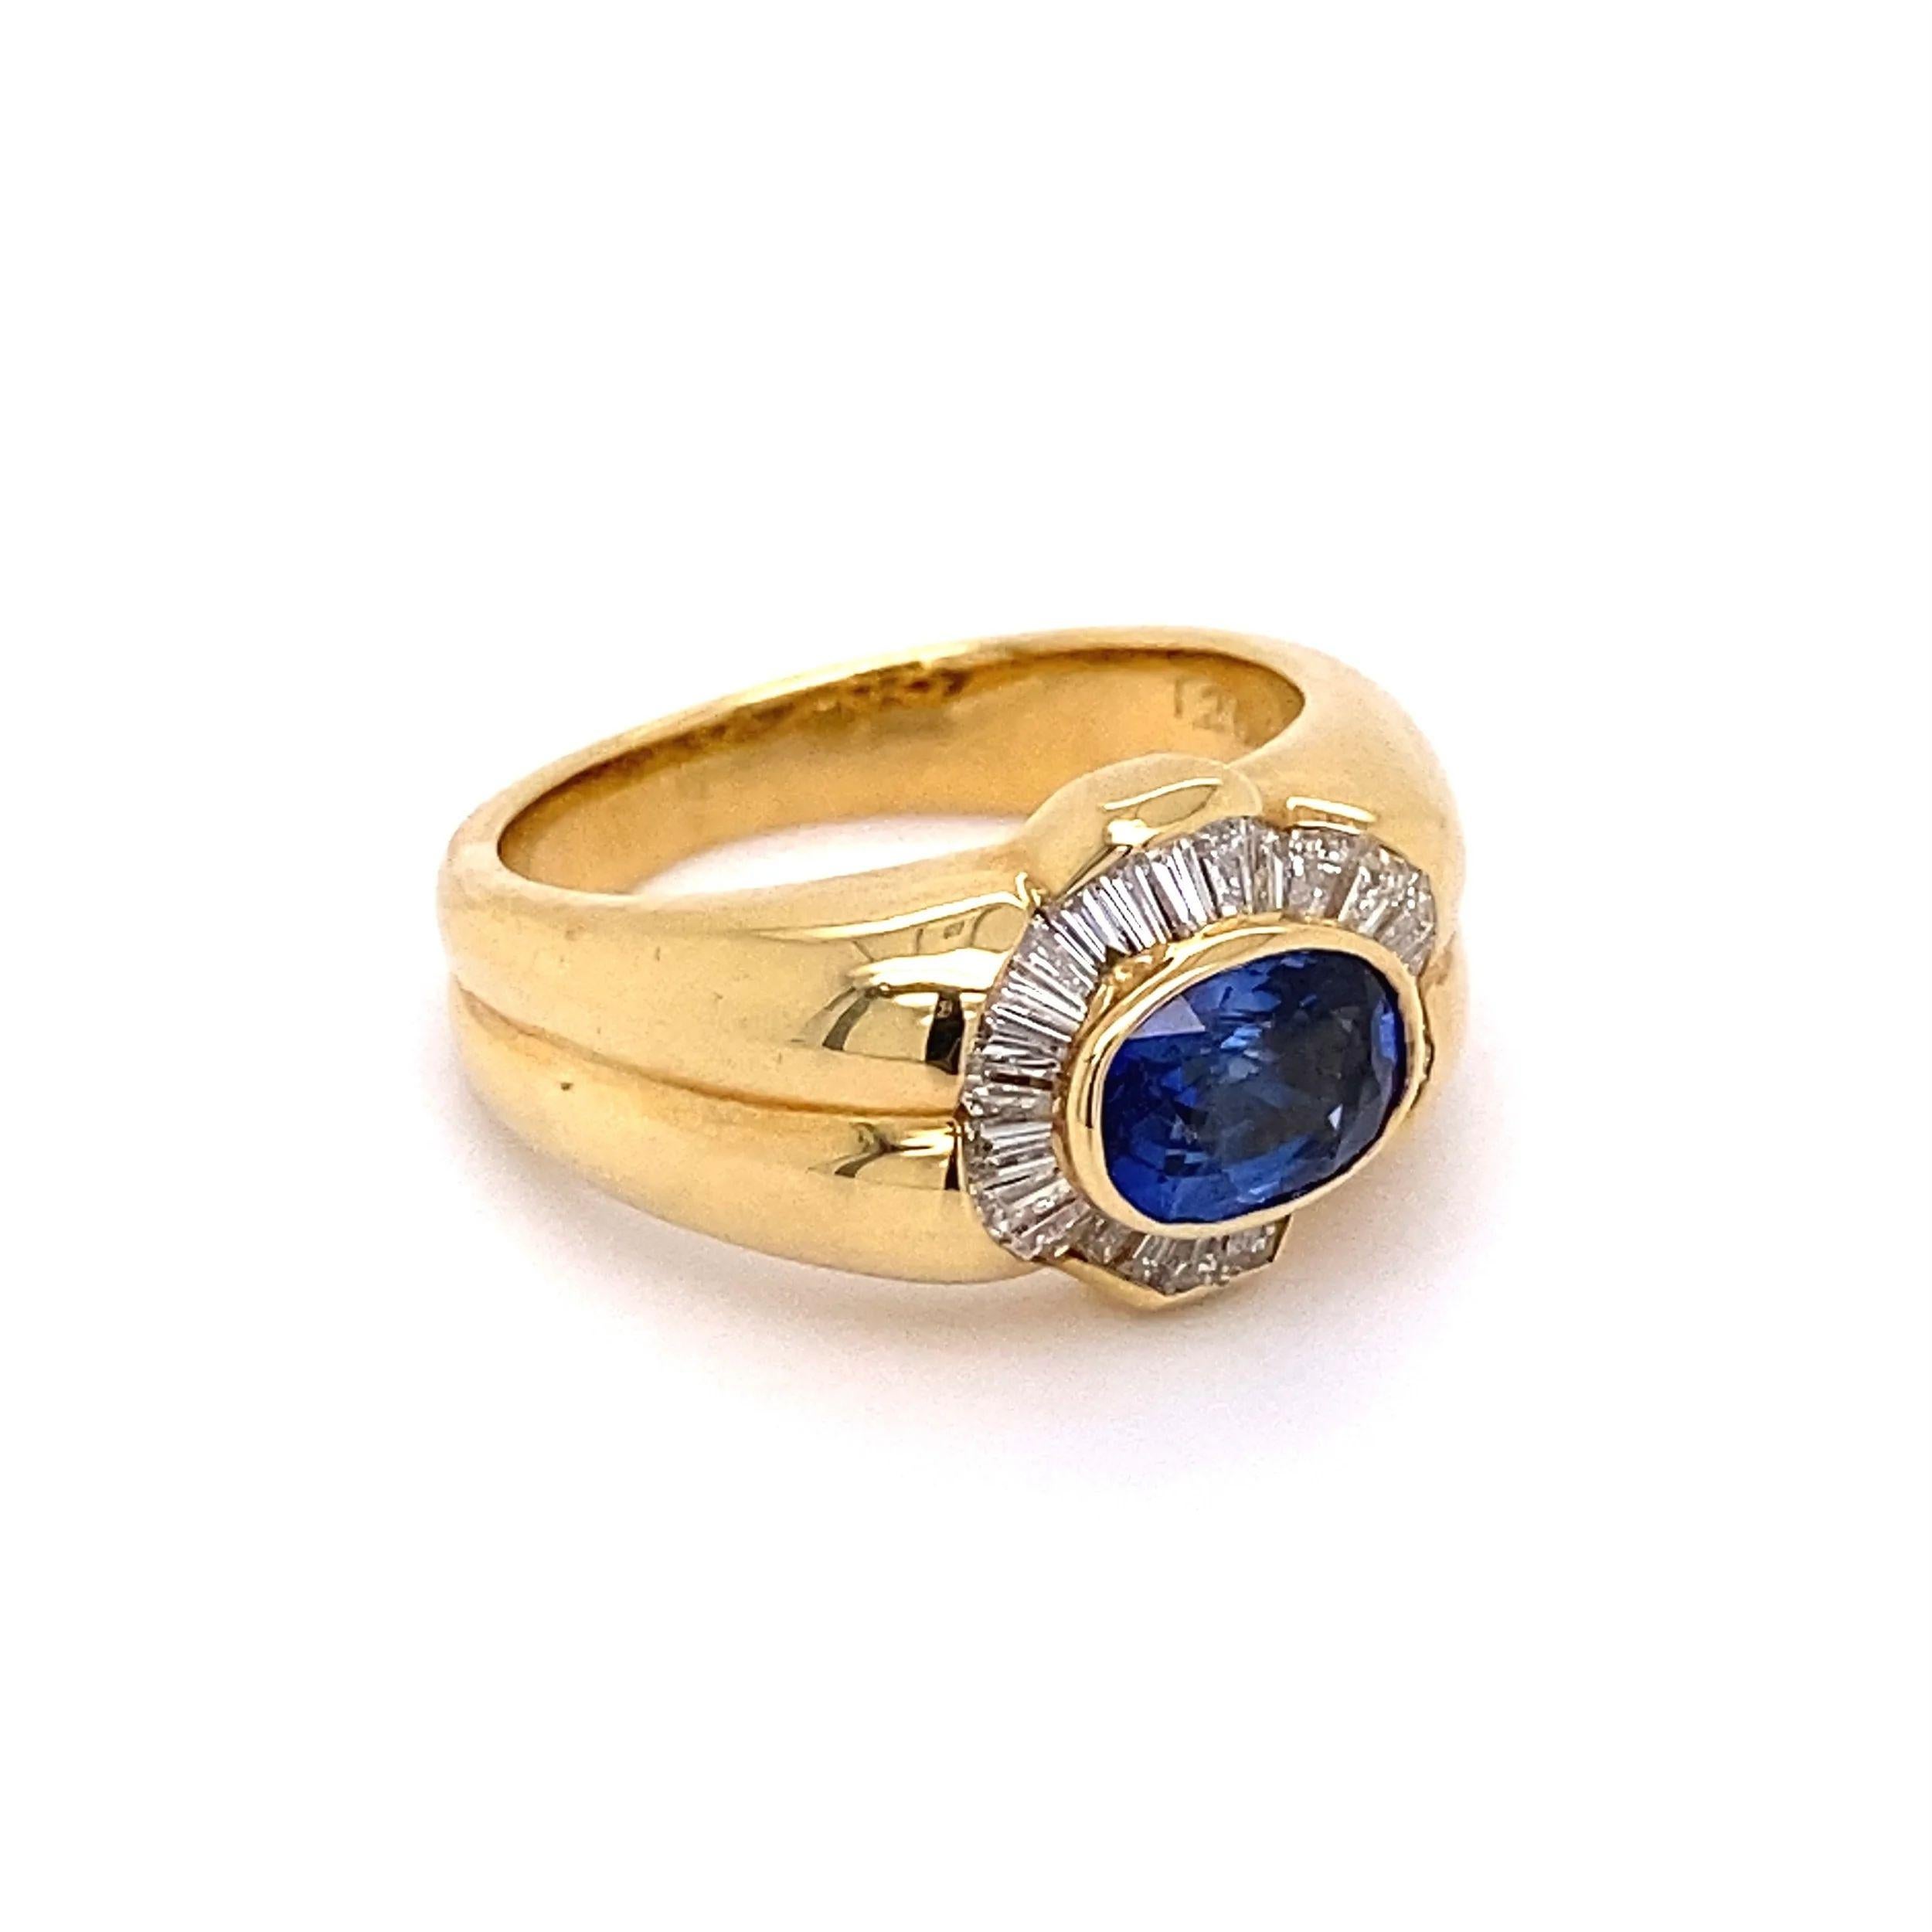 Simply Beautiful! Finely detailed Vintage Sapphire and Diamond Gold Ring. Centering a securely nestled Hand set Oval Sapphire, weighing approx. 1.26 Carats. Surrounded by Baguette Diamonds weighing approx. 0.67tcw. Approx. dimensions: 0.91” l x 0.